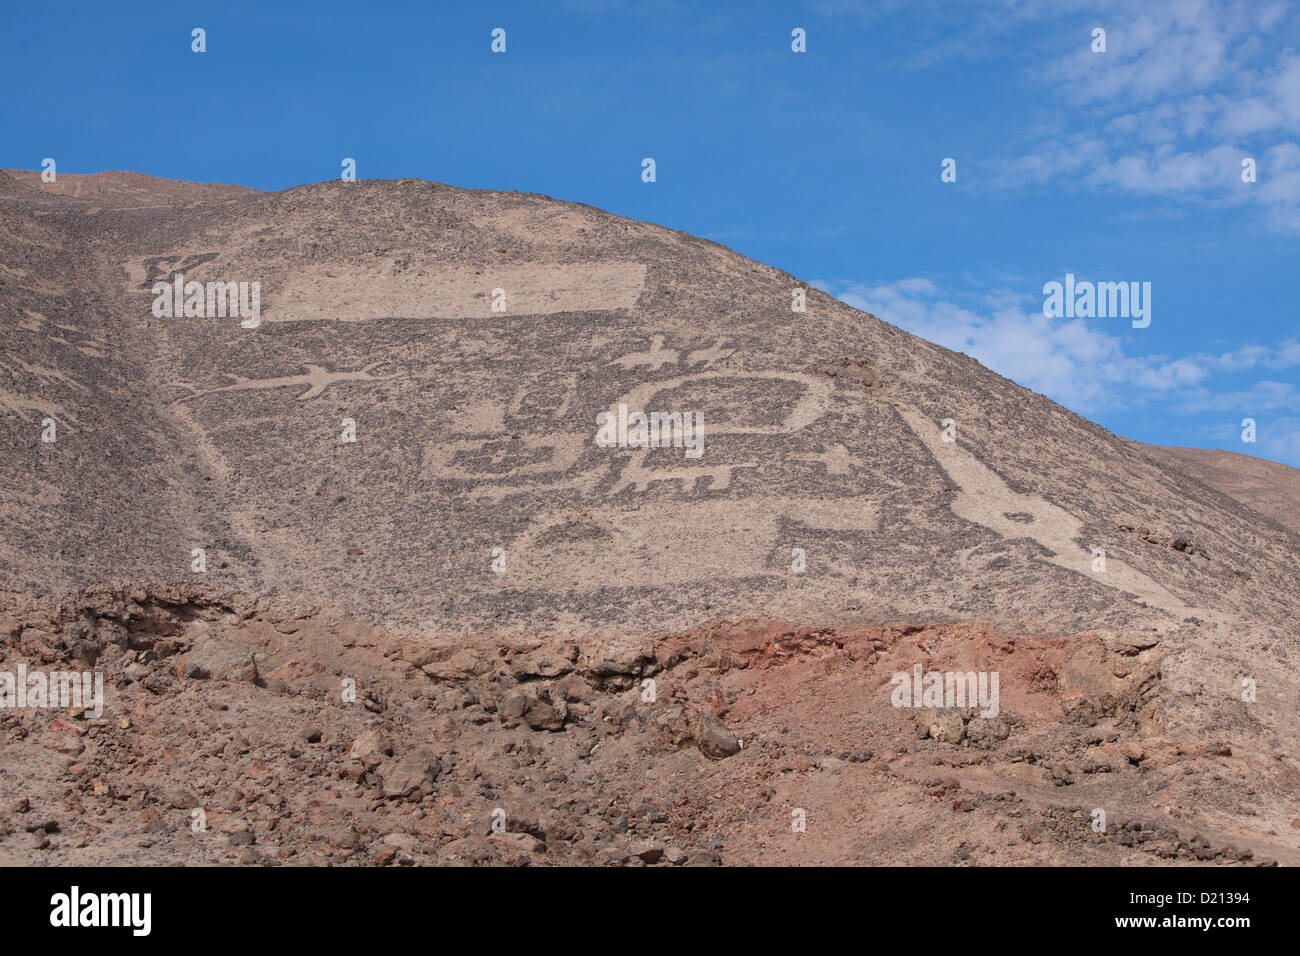 Geoglyphs depicting animal and human figures on hills at Monumento National Geoglifos de Pintados, near Iquique, Tarapaca, Chile Stock Photo